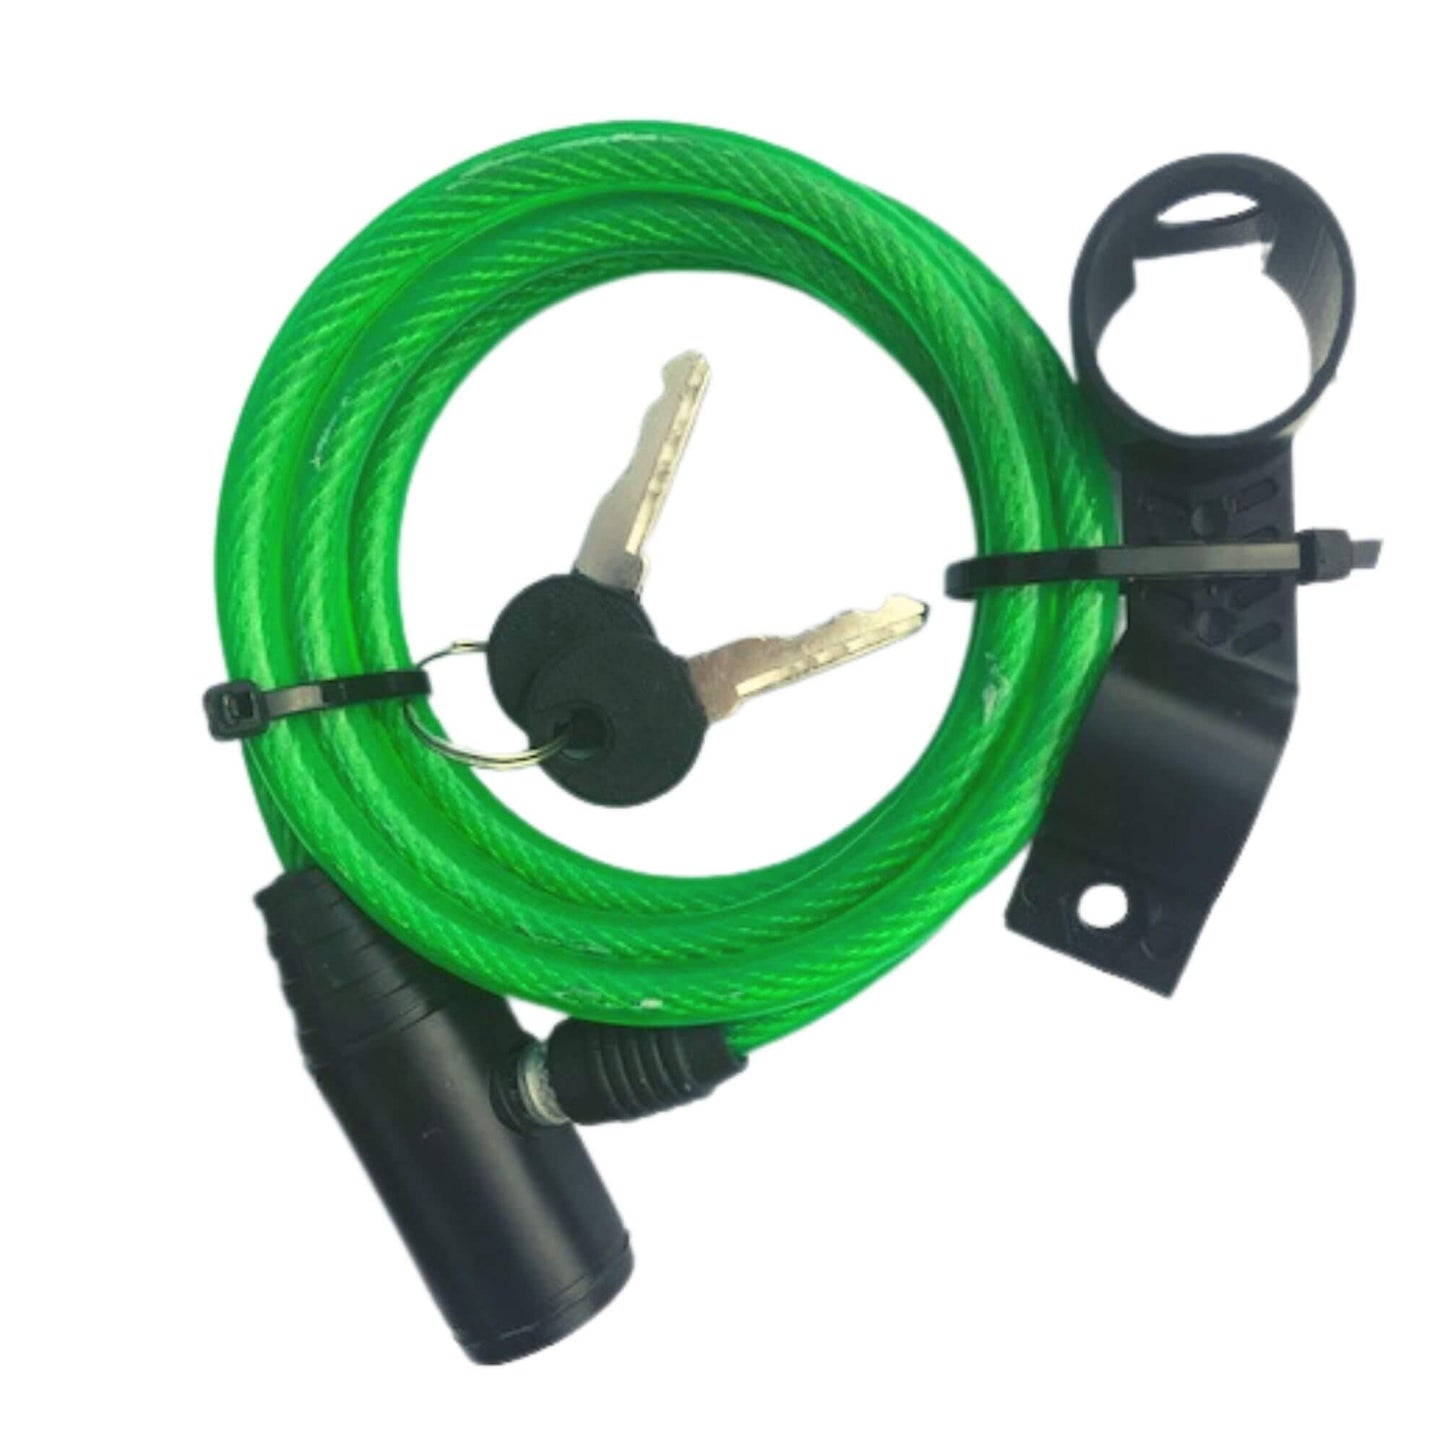 Coiled bicycle lock with key.